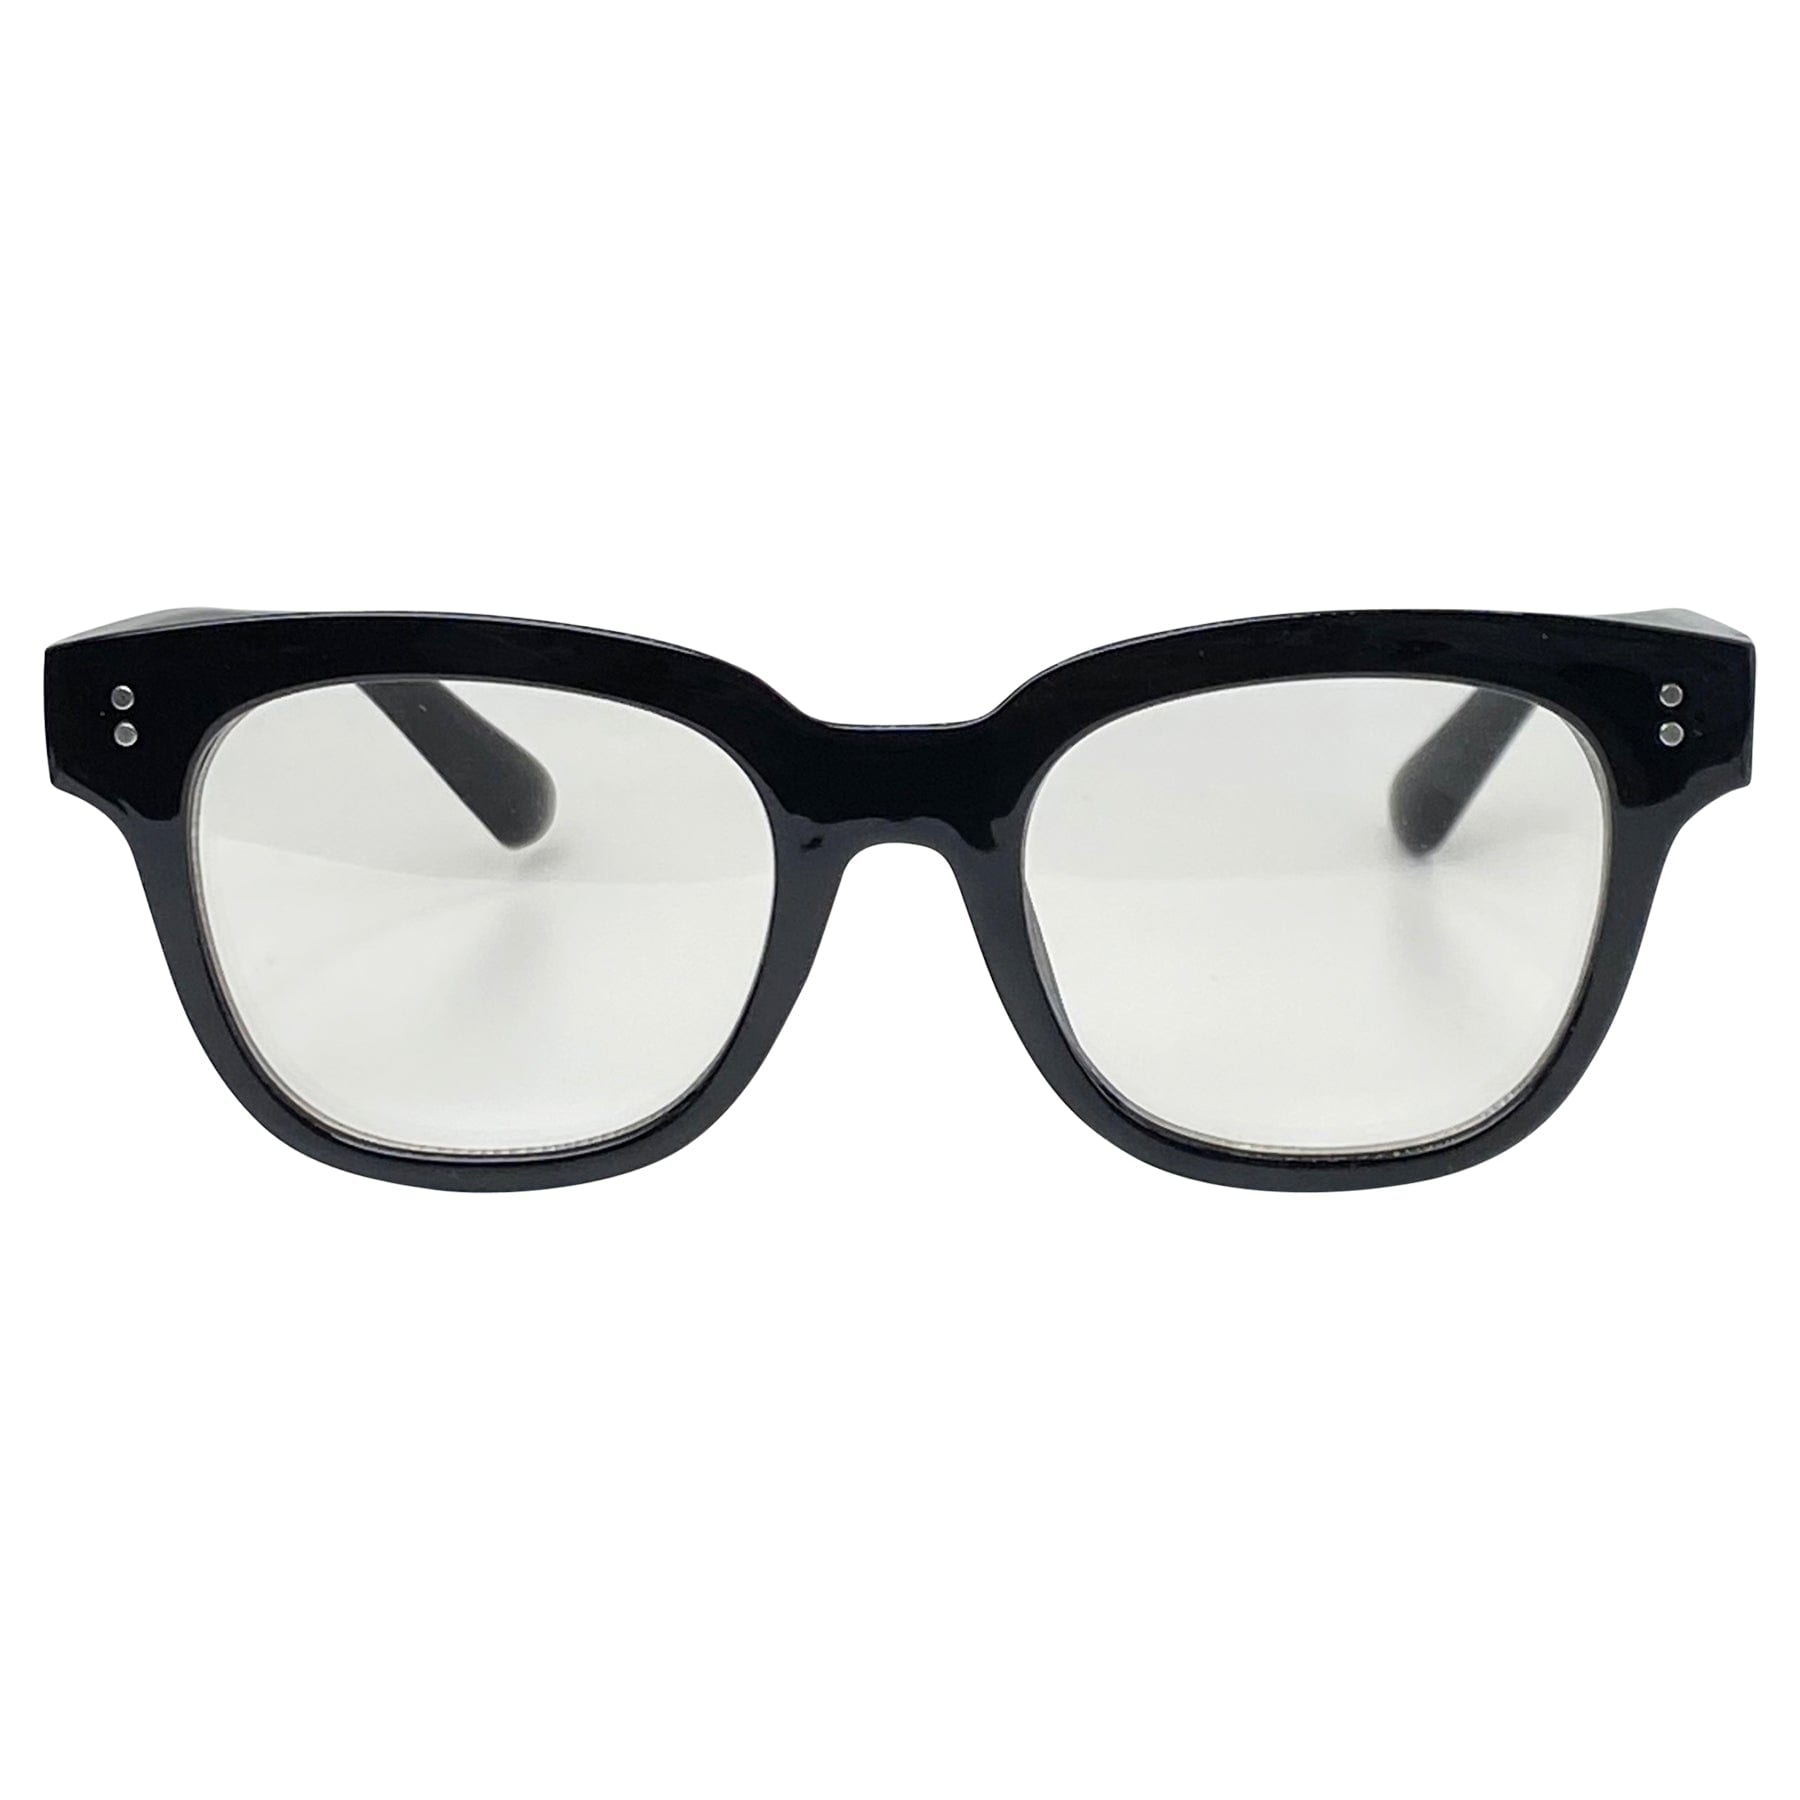 black colored glasses with a clear blueblocker lens 